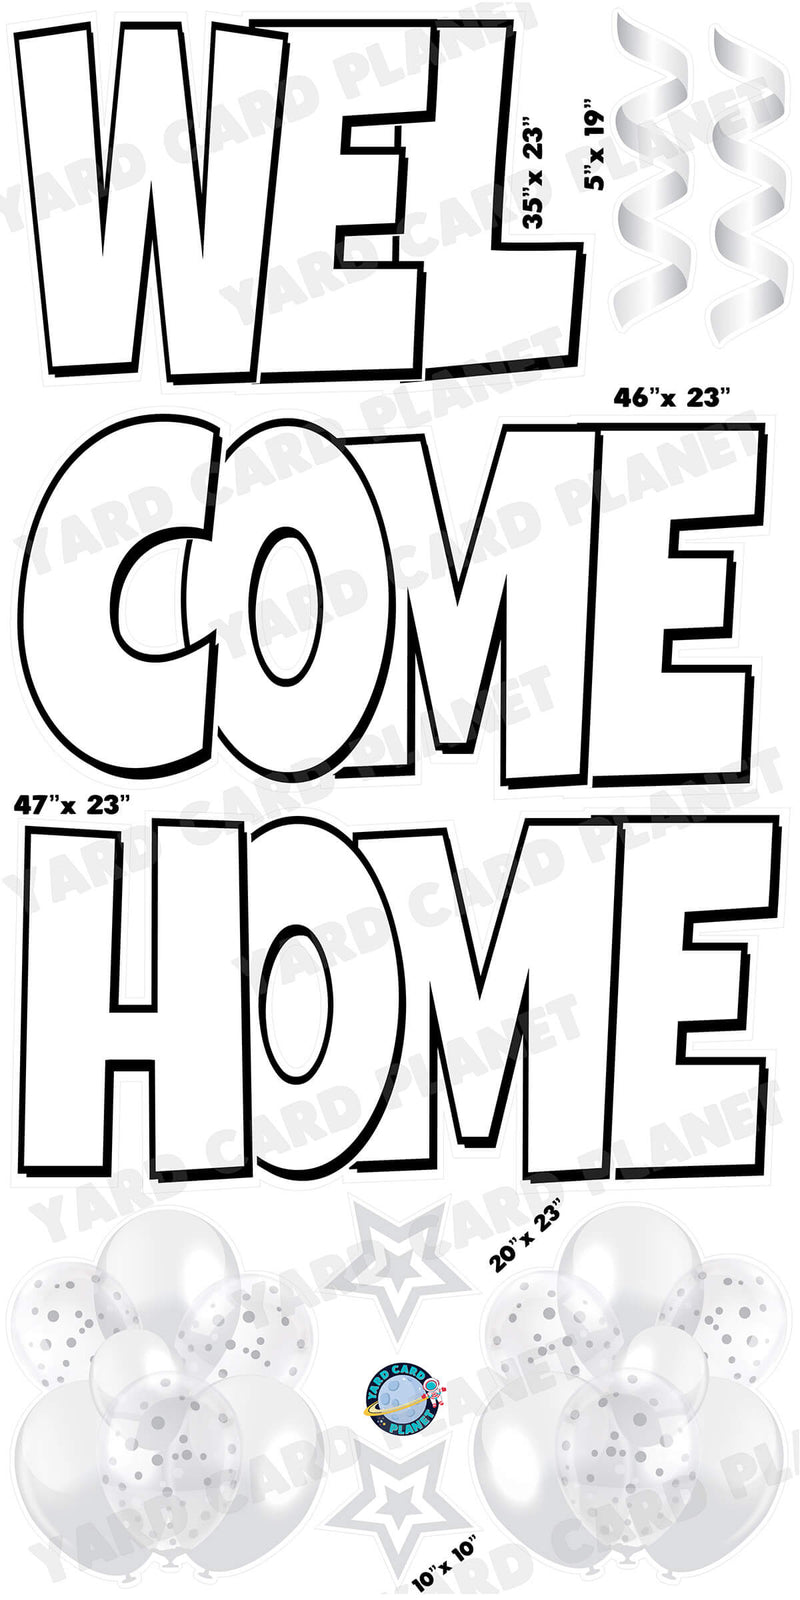 Large 23" Welcome Home Yard Card EZ Quick Sets in Luckiest Guy Font and Flair in White Solid Color